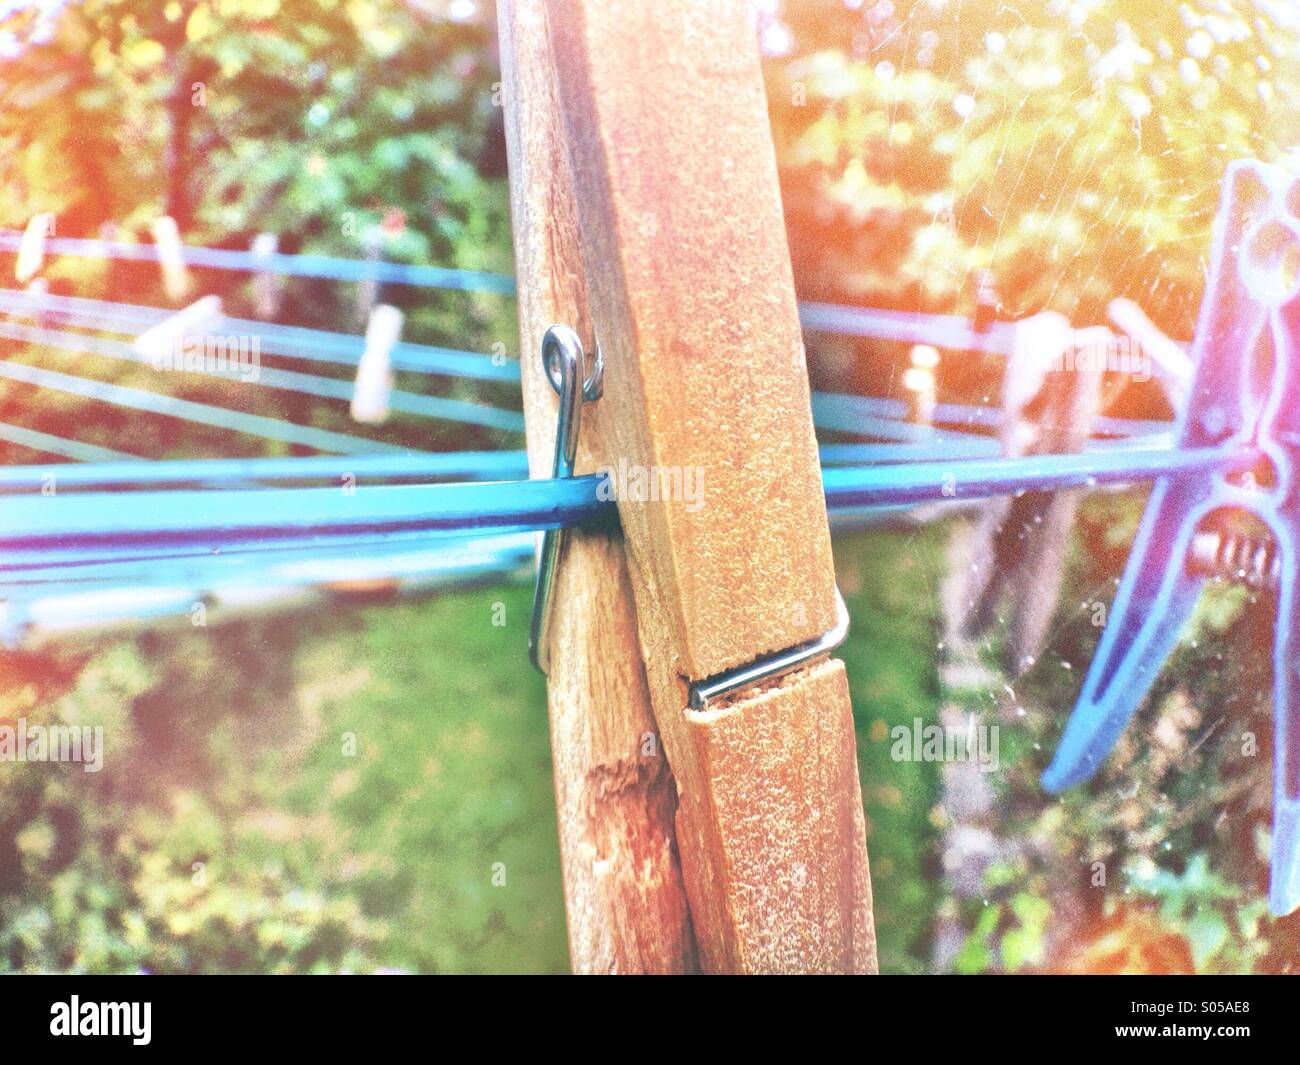 Clothes pegs on a washing line, evening sunshine in a garden Stock Photo